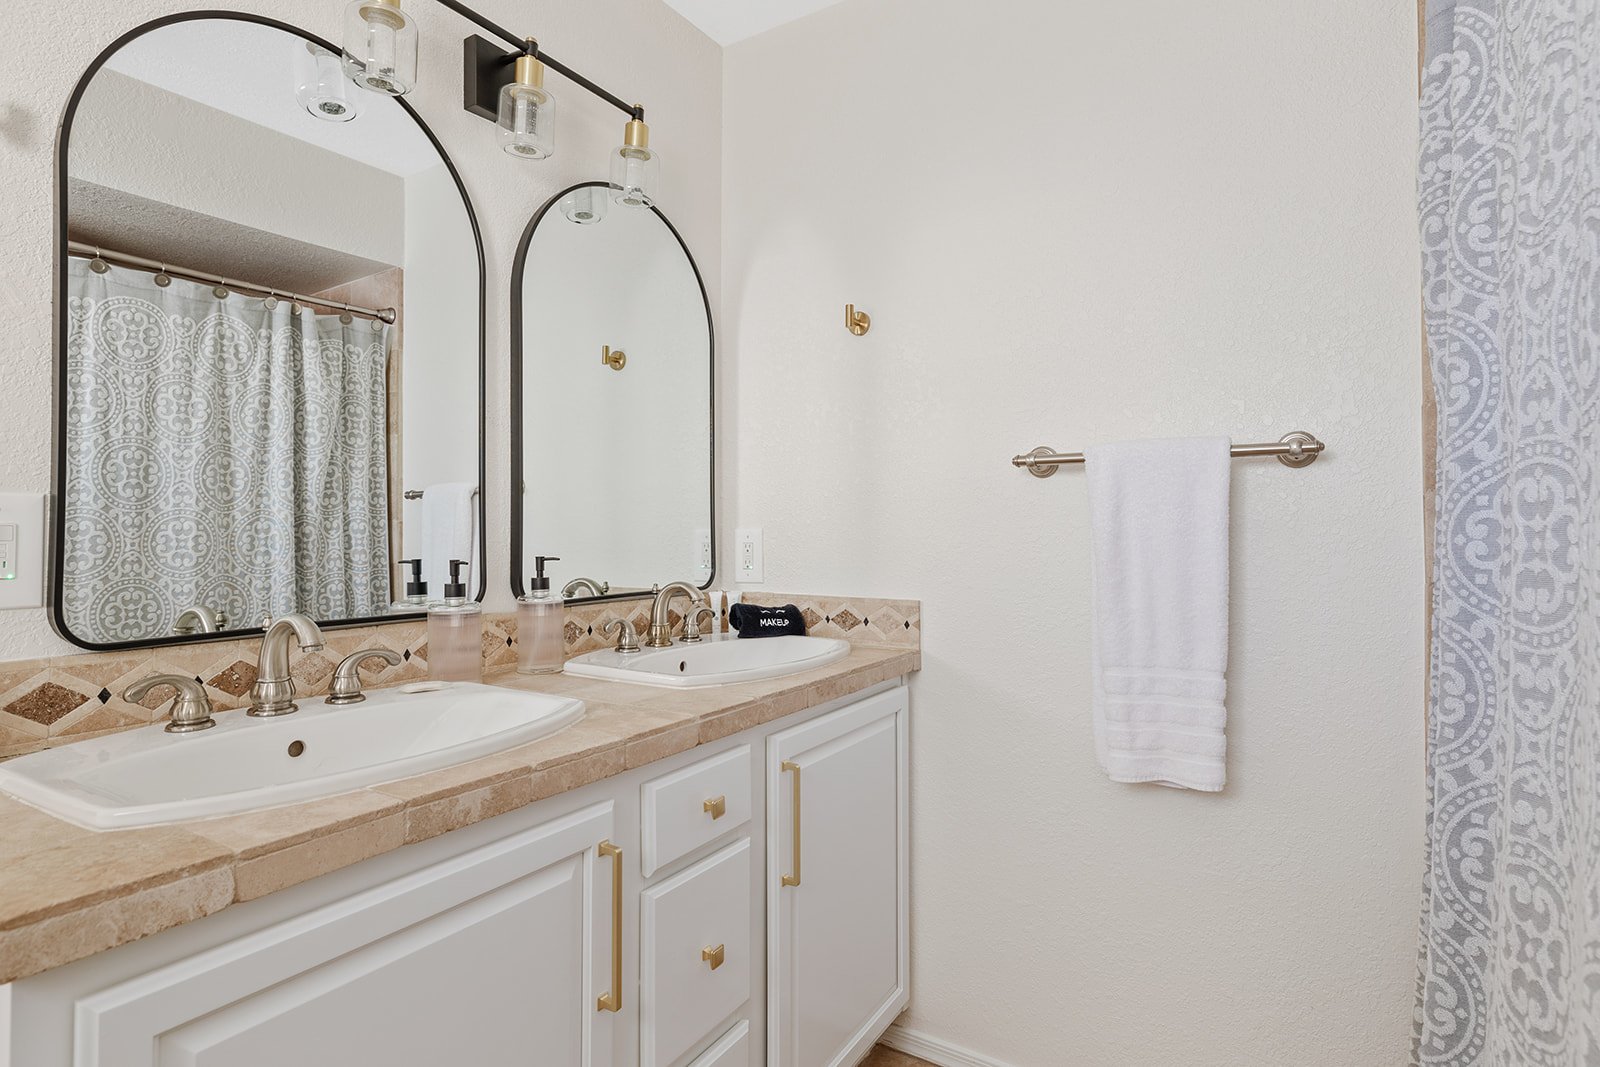 Secondary ensuite includes double vanity, walk in closet, shower/tub combo.